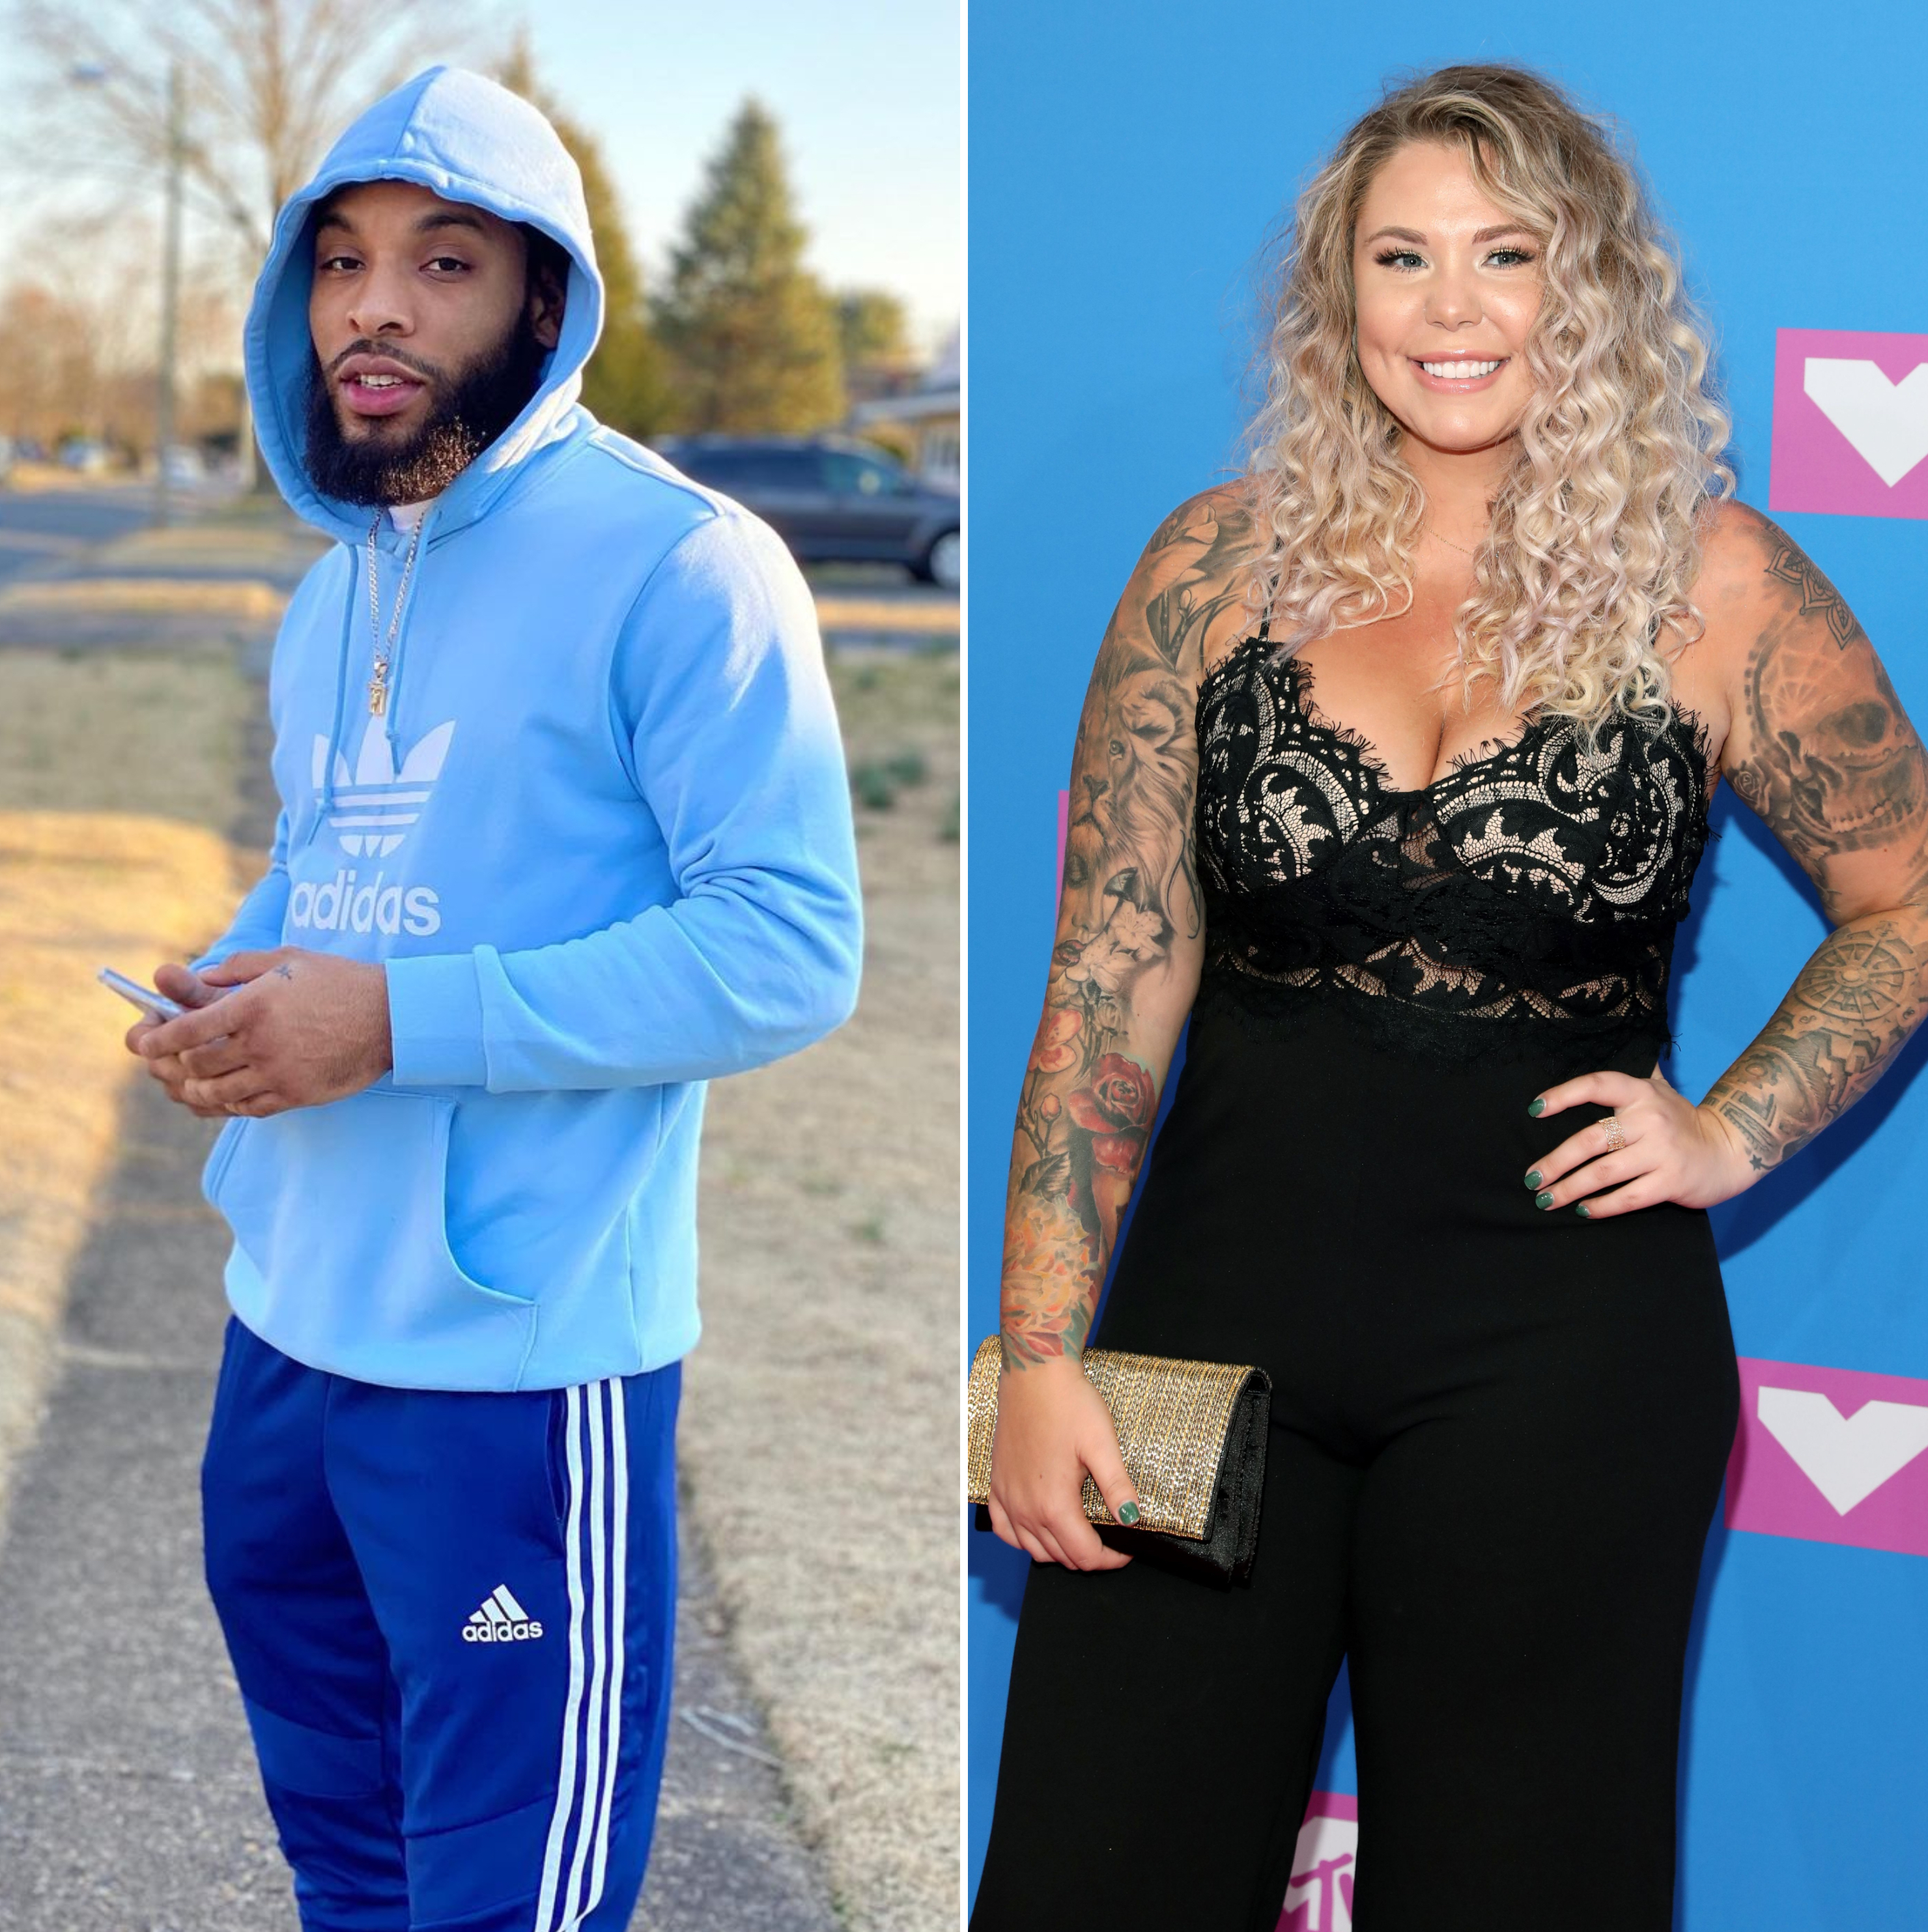 Chris Lopez Says He Had Sex With Kailyn Lowry at Doctors Office